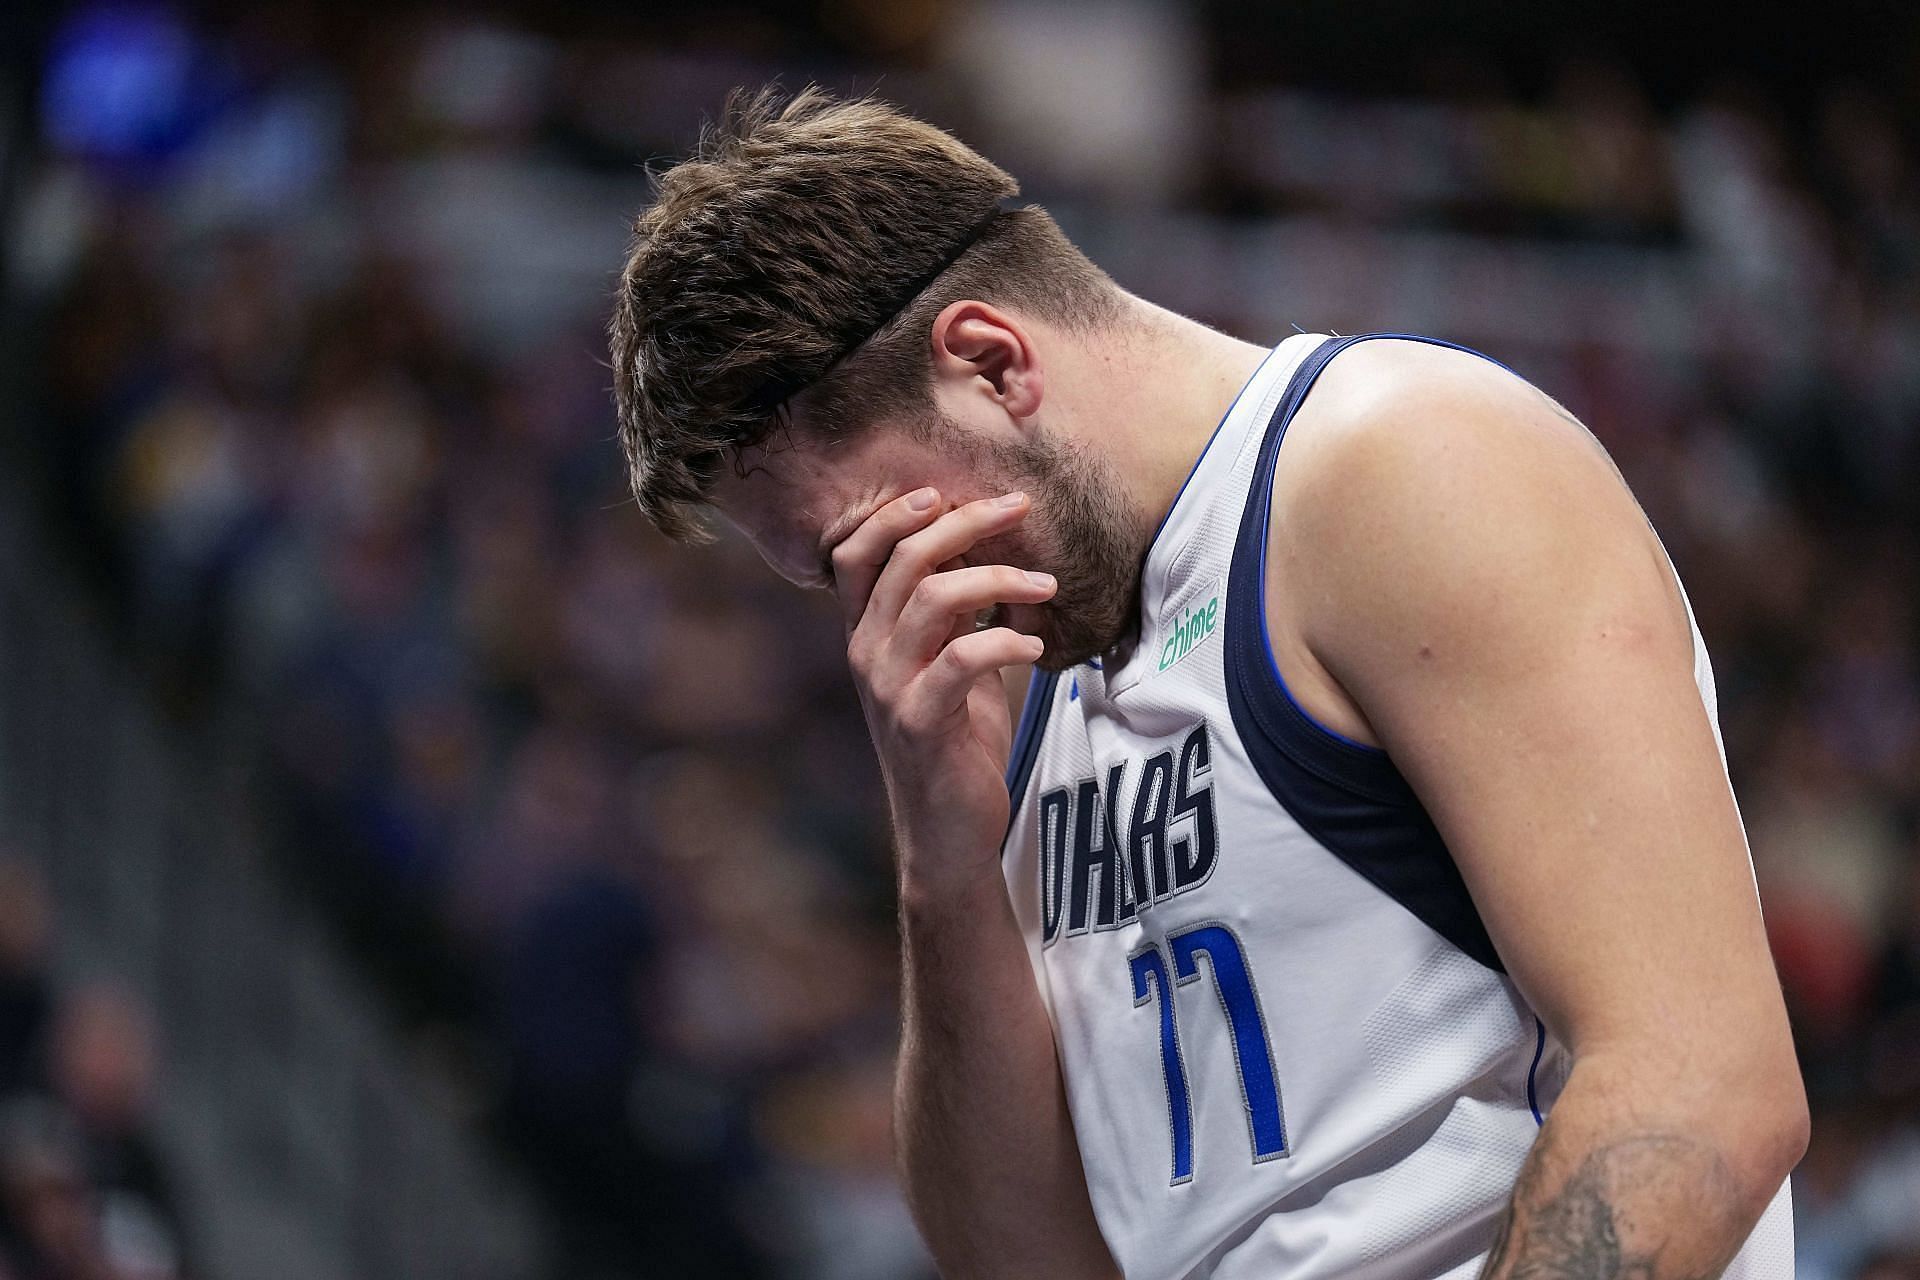 Is Luka Doncic playing tonight against Houston Rockets? Latest injury update for 4x All-Star (Dec. 22)